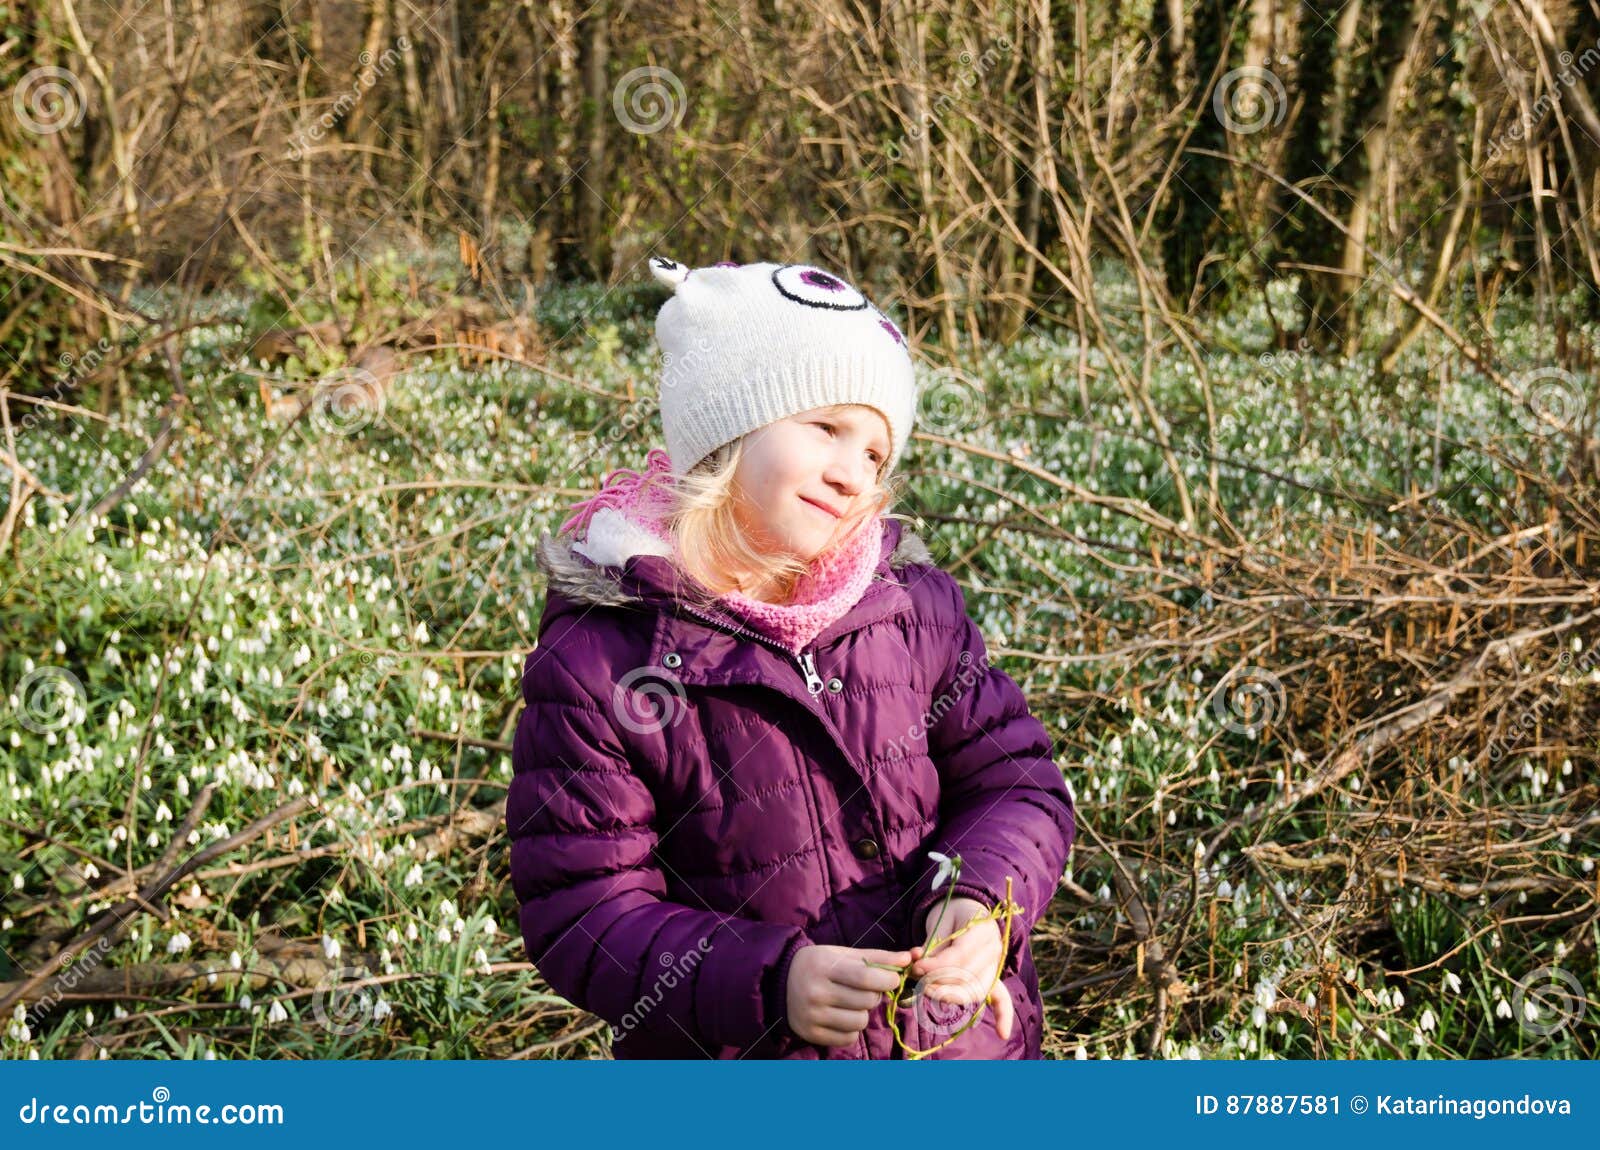 girl and blossoming white snowdrop